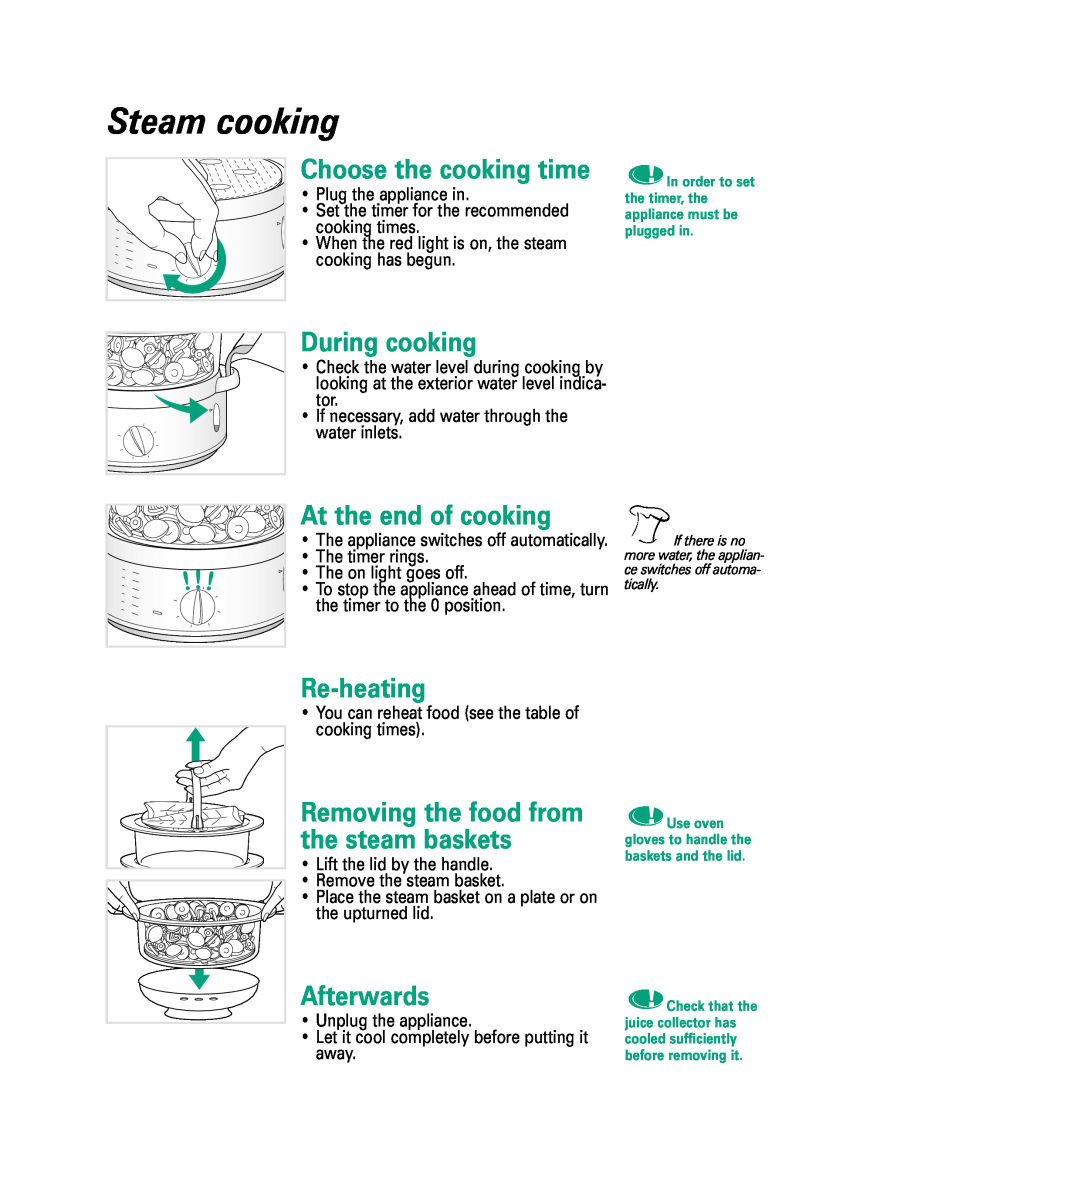 Groupe SEB USA - T-FAL 6168 Steam cooking, Choose the cooking time, During cooking, At the end of cooking, Re-heating 